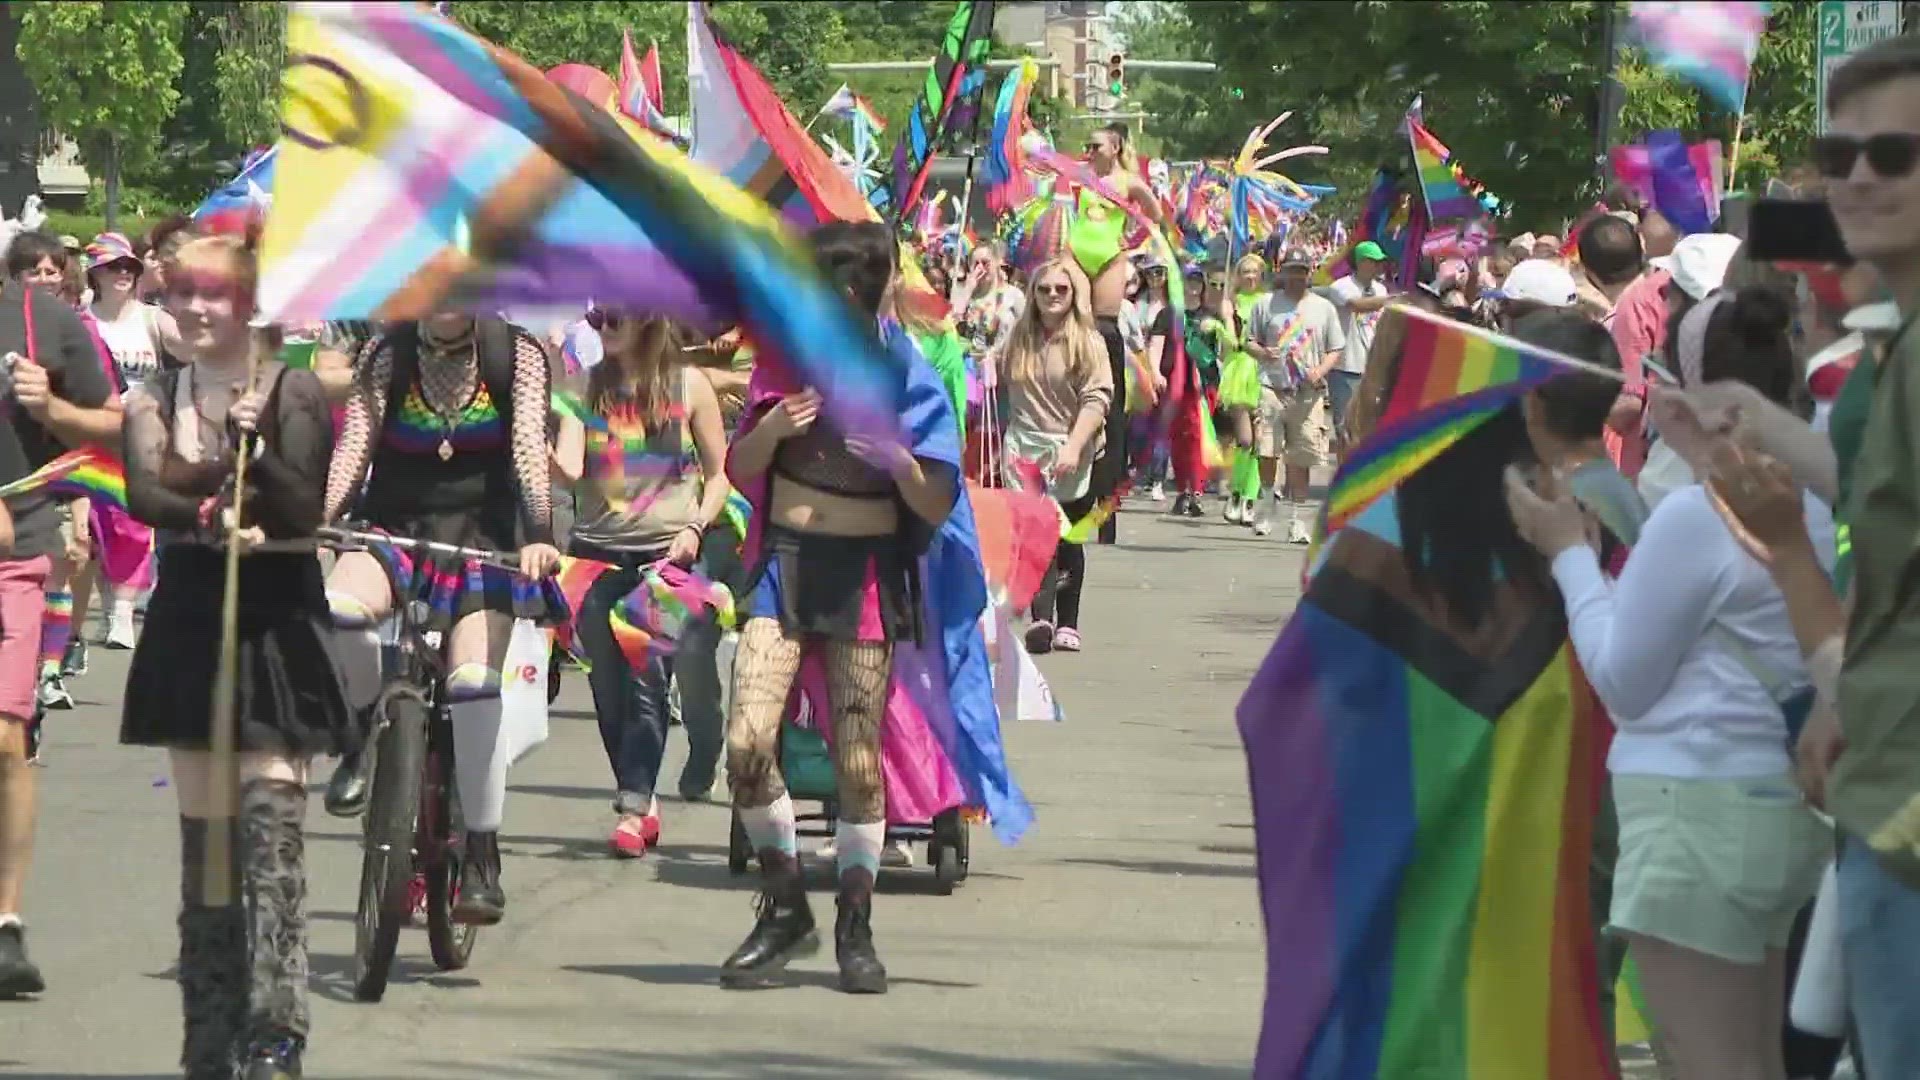 Thousands across Western New York showed up in rainbow colors and festive outfits, waving flags and expressing their support for the LGTBQ+ community.